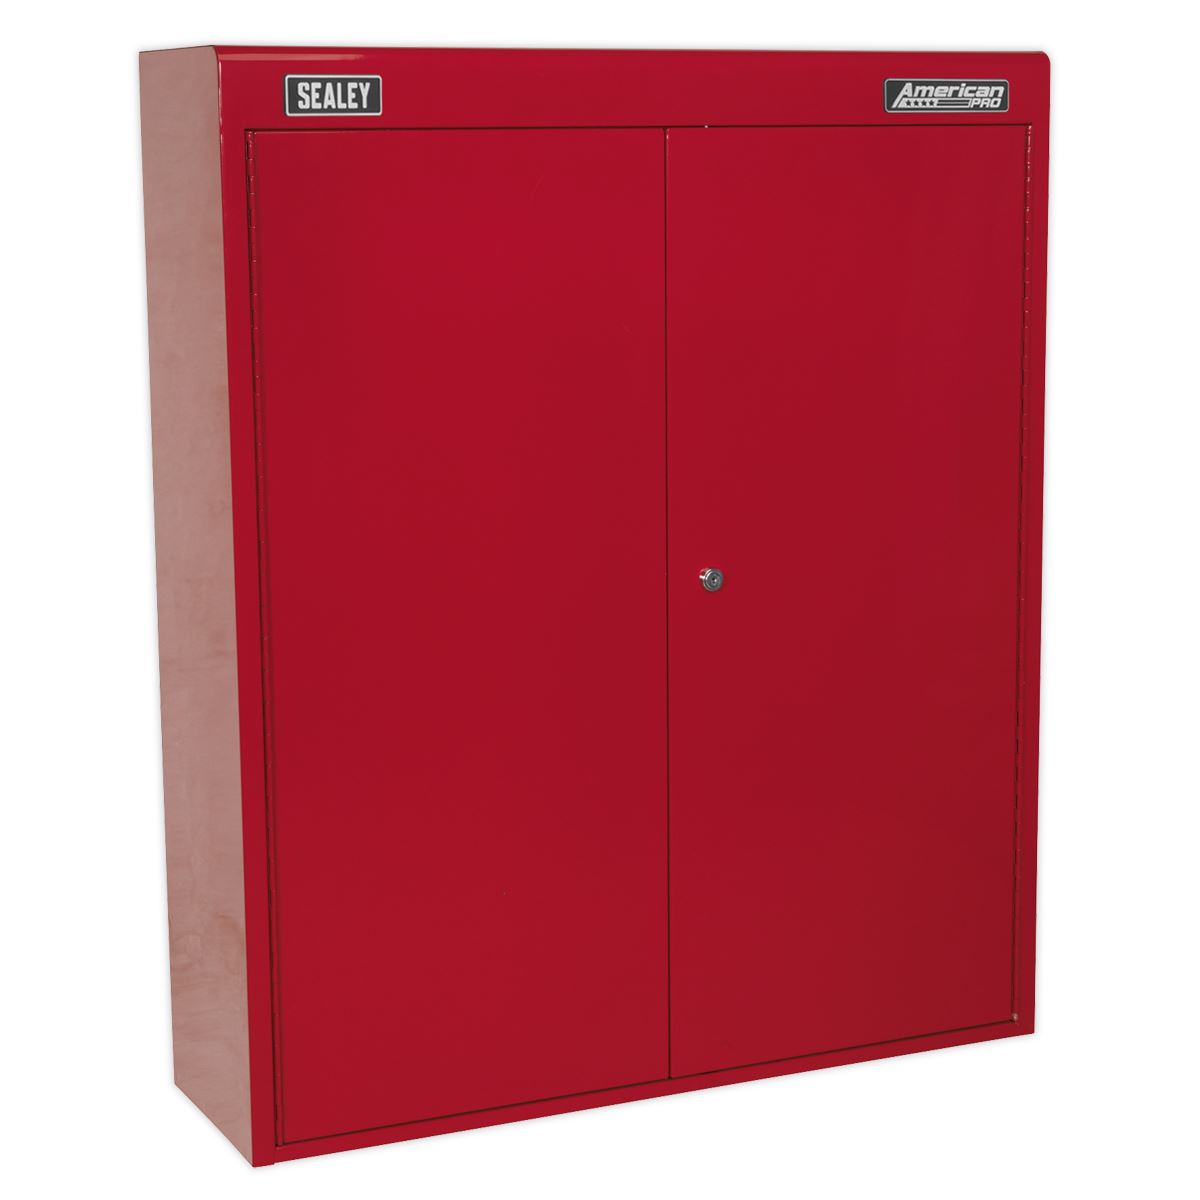 Sealey American Pro Wall Mounting Tool Cabinet with 2 Drawers